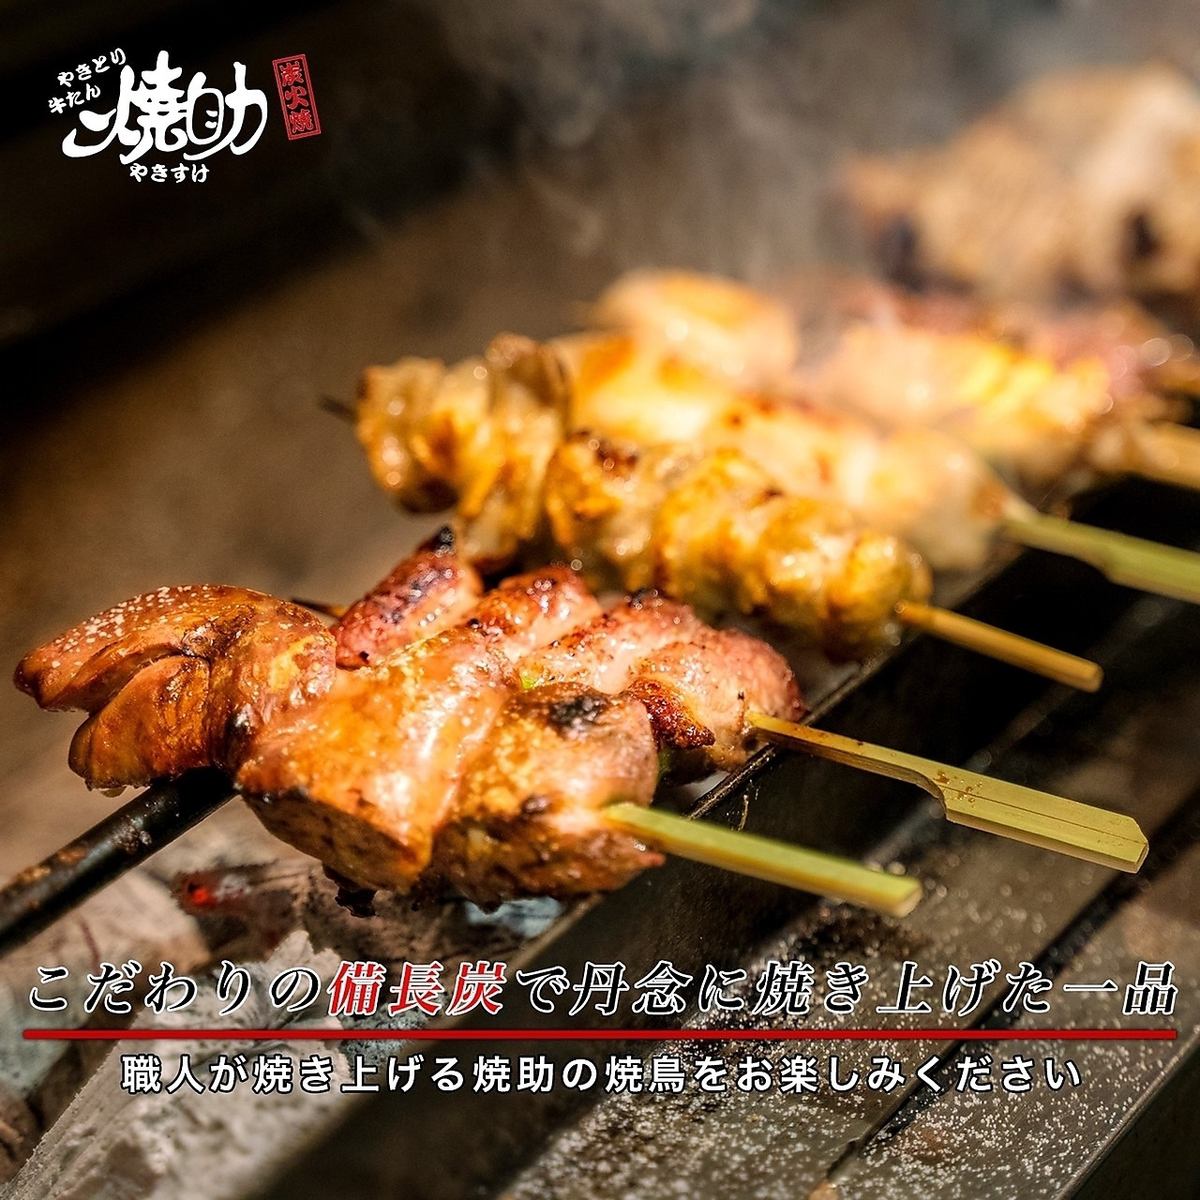 The yakitori and beef tongue are excellent; private rooms with horigotatsu (sunken kotatsu table) and private tables are available; smoking is allowed!